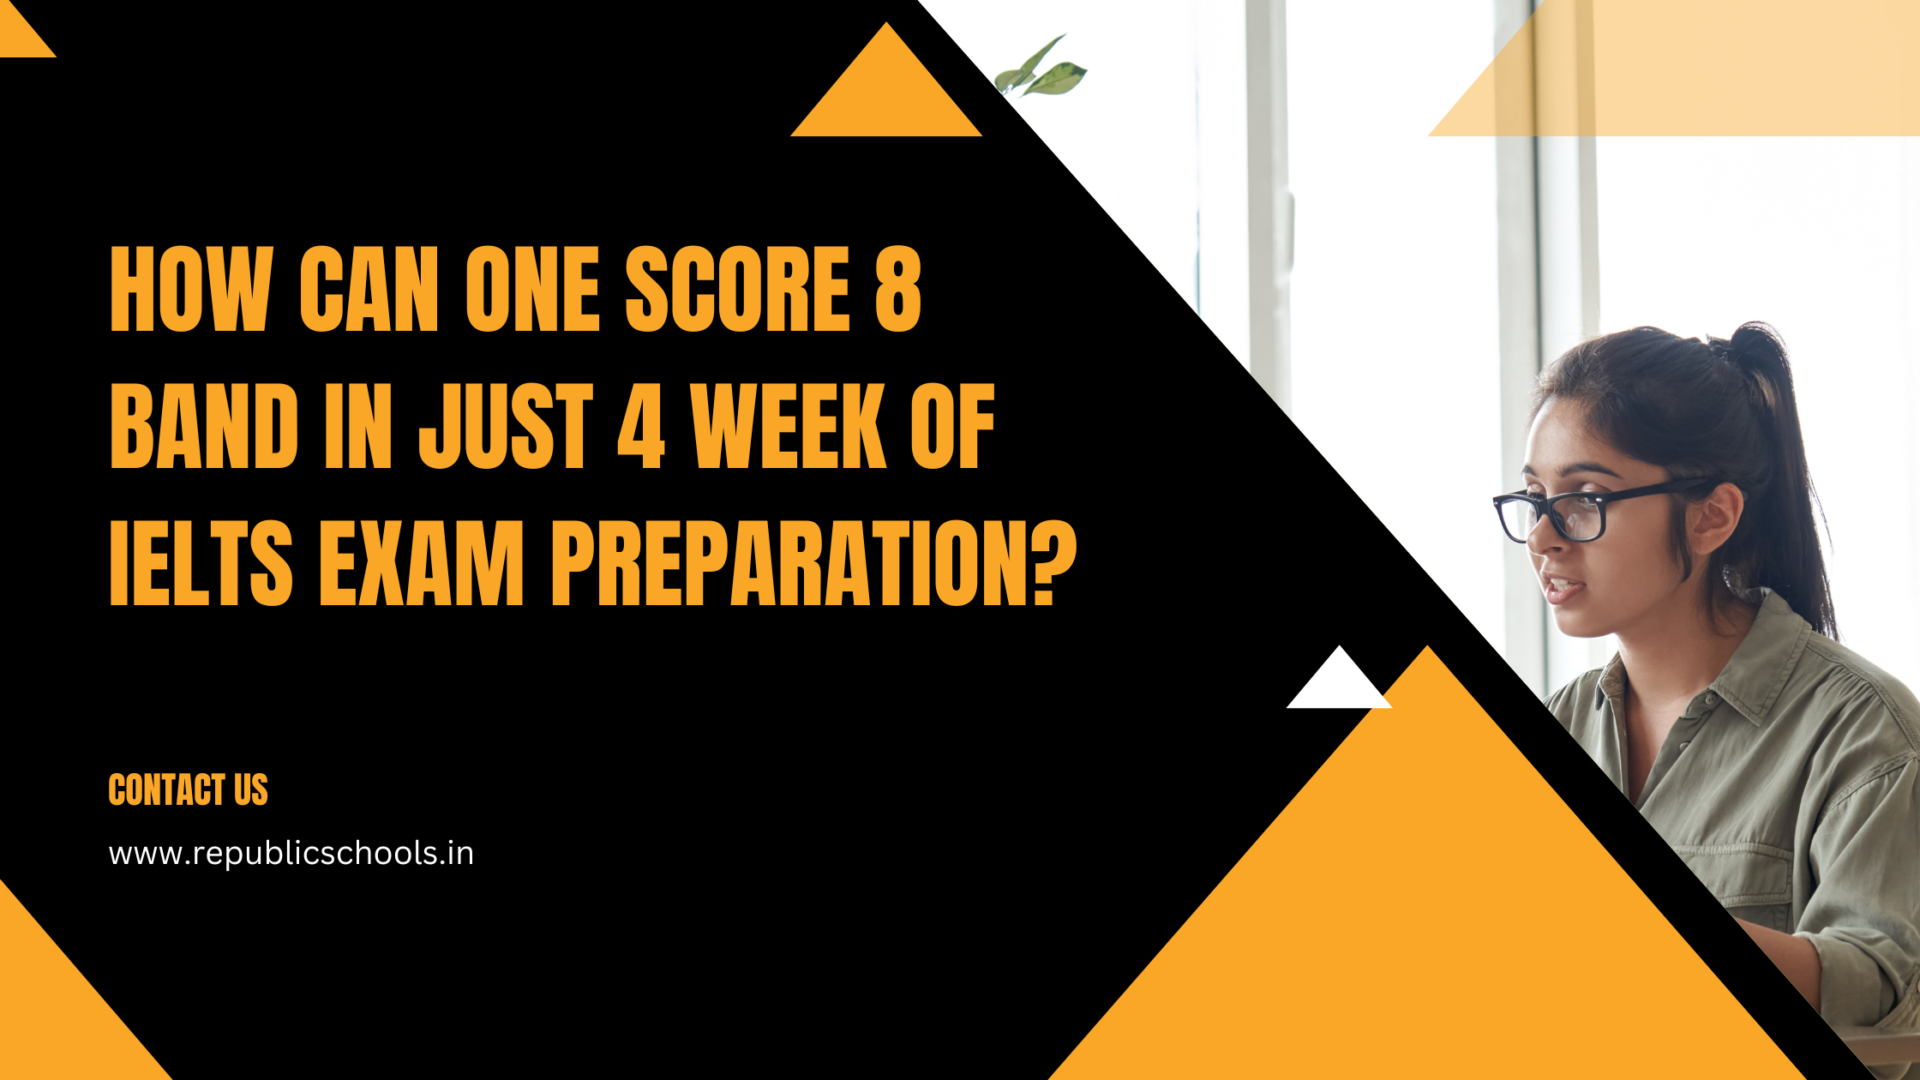 How Can One Score 8 Band In Just 4 Weeks of IELTS Exam Preparation?